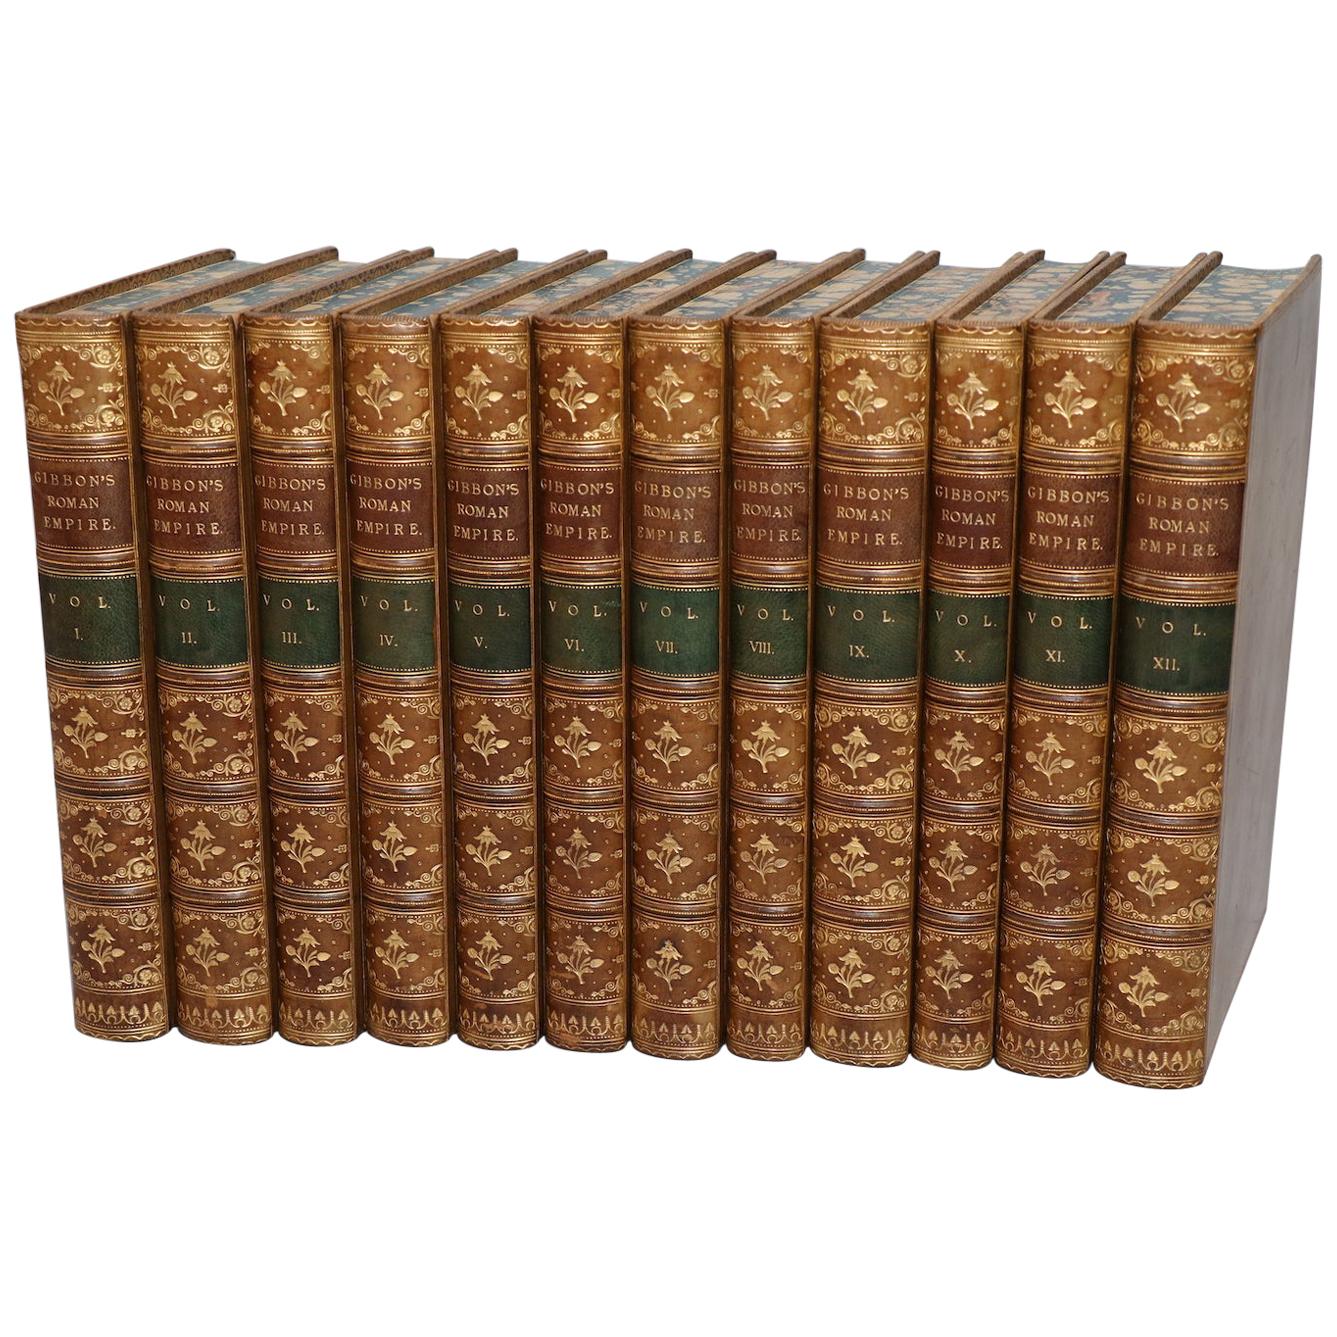 Books, Edward Gibbon's "The History of the Decline and Fall of the Roman Empire"